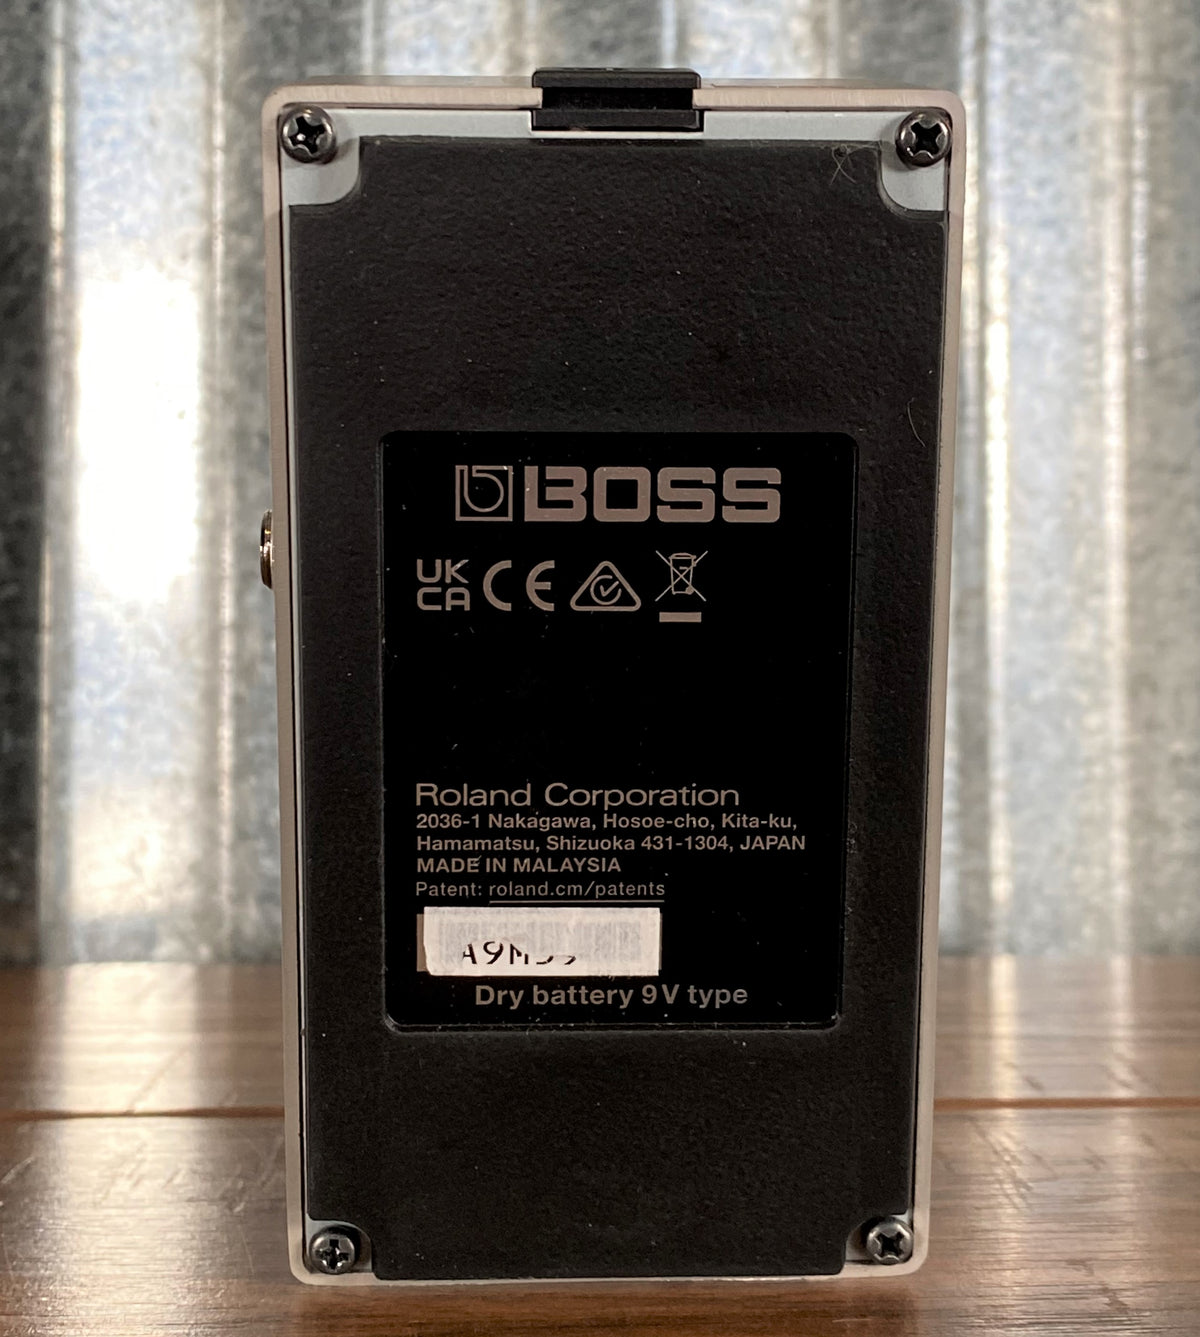 Take a look at our exciting collection of Boss GE-7 Seven Band